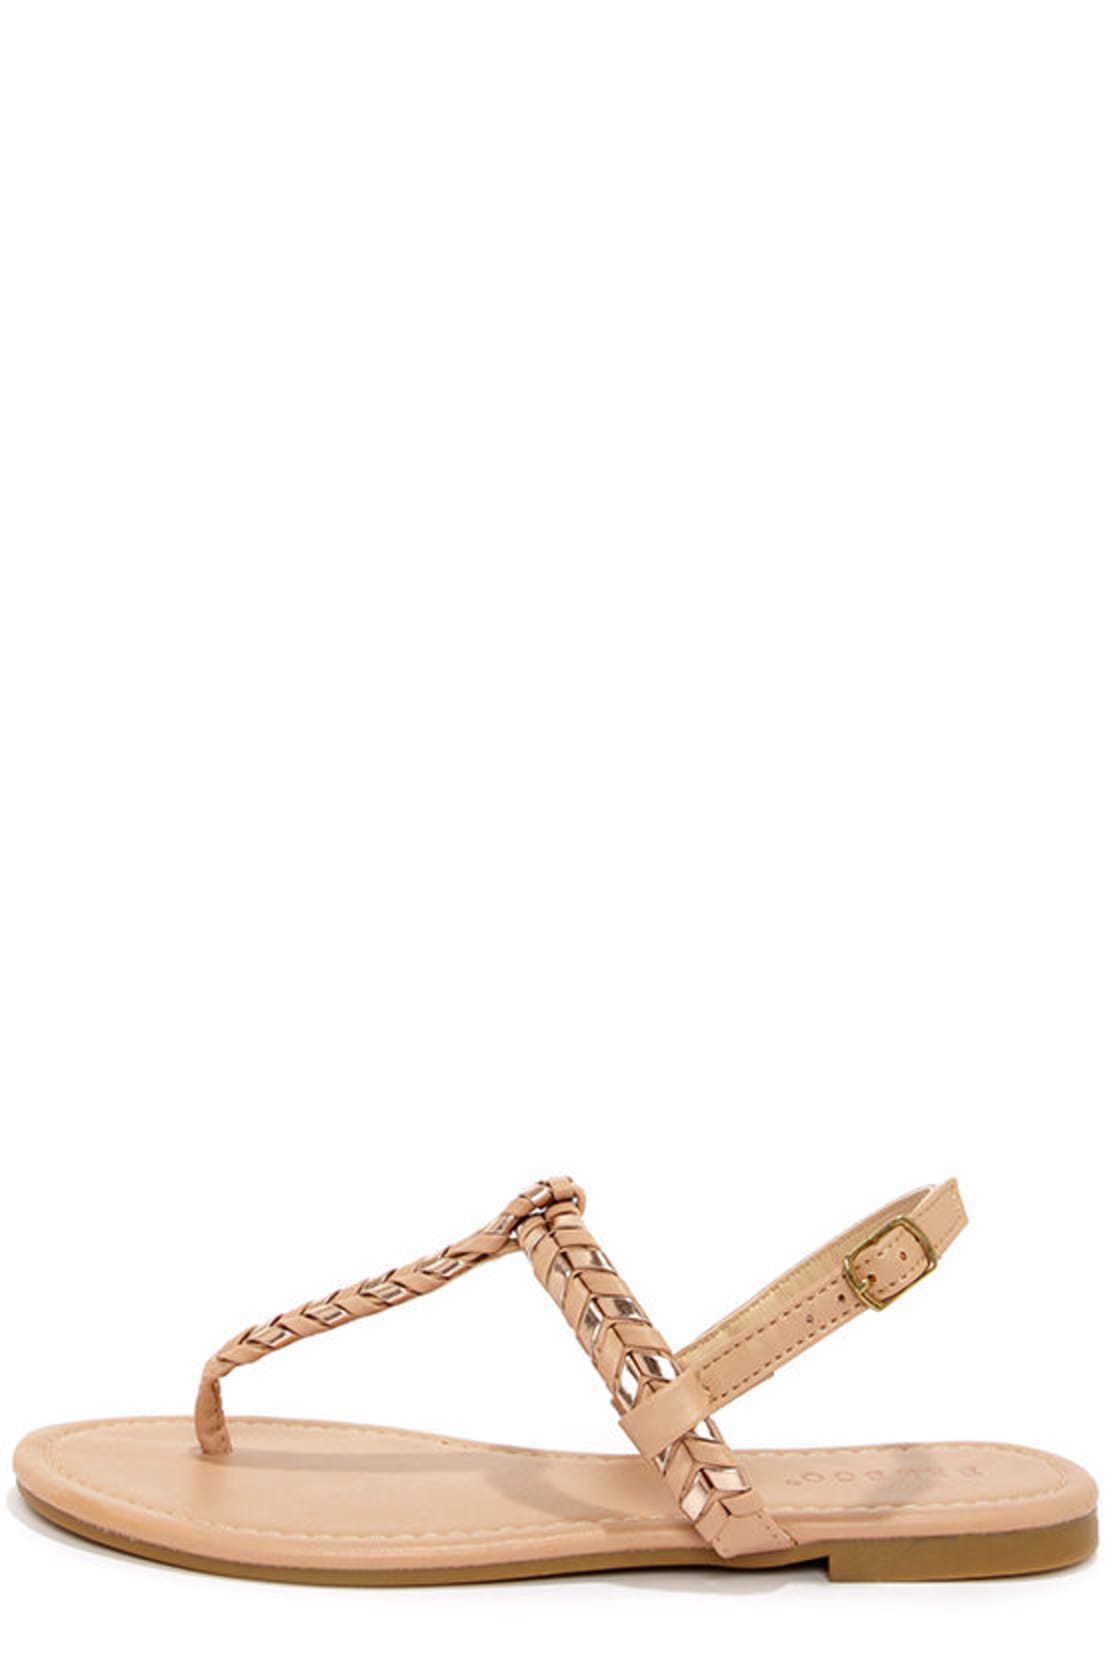 Cute Thong Sandals - Nude and Rose Gold Sandals -Flat Sandal - Lulus